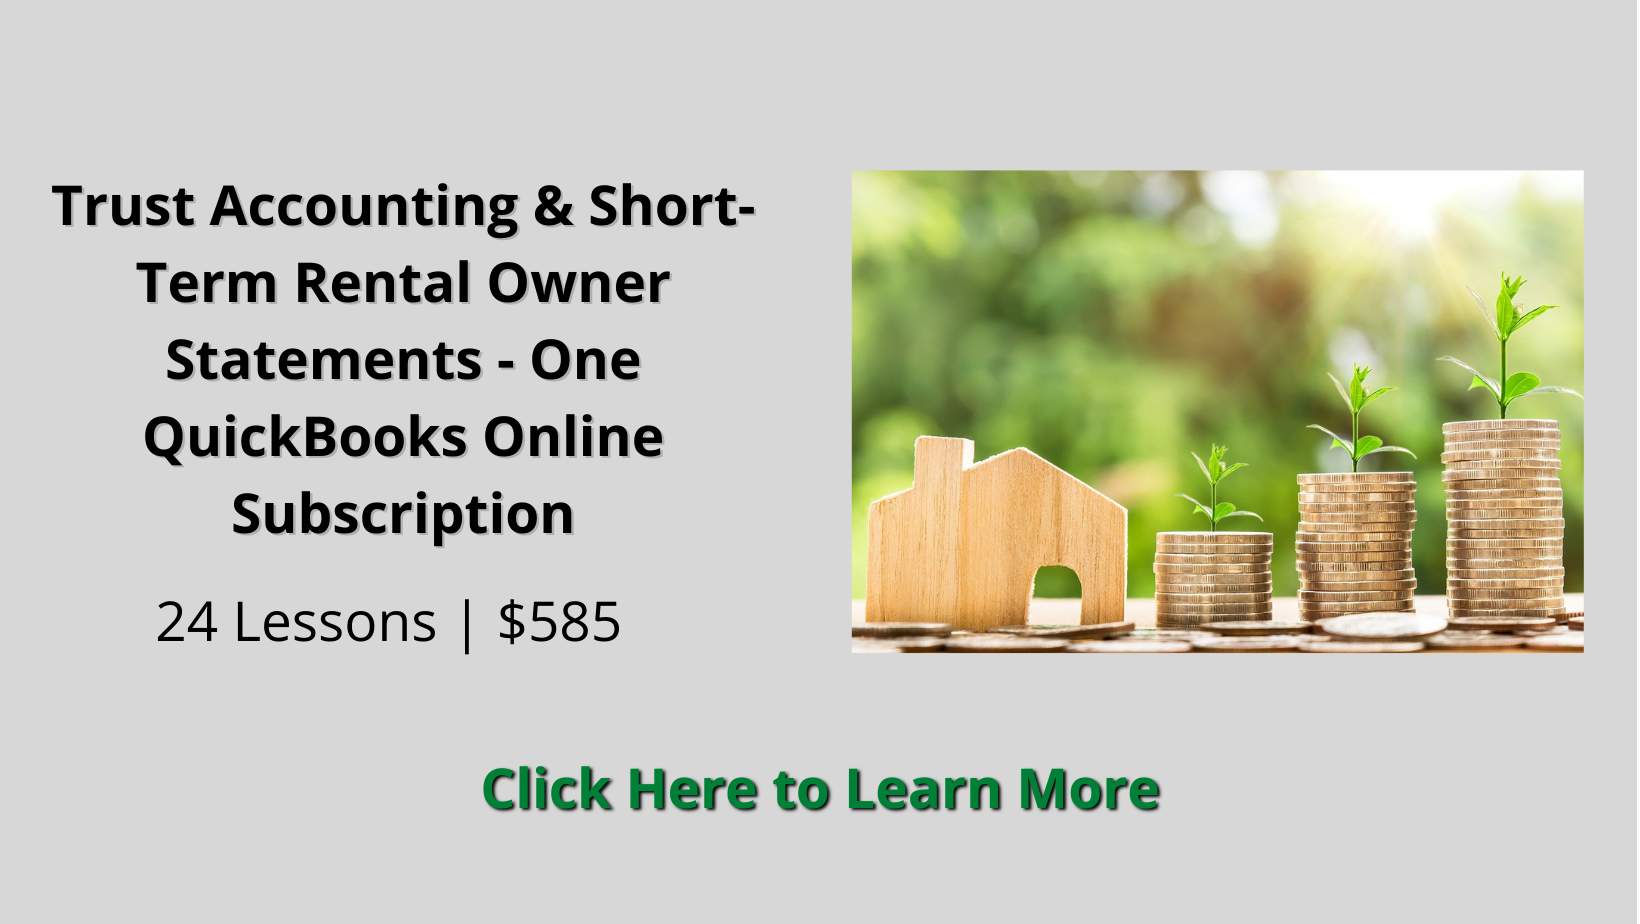 Trust Accounting & Short-Term Rental Owner Statements - One QuickBooks Online Subscriptions